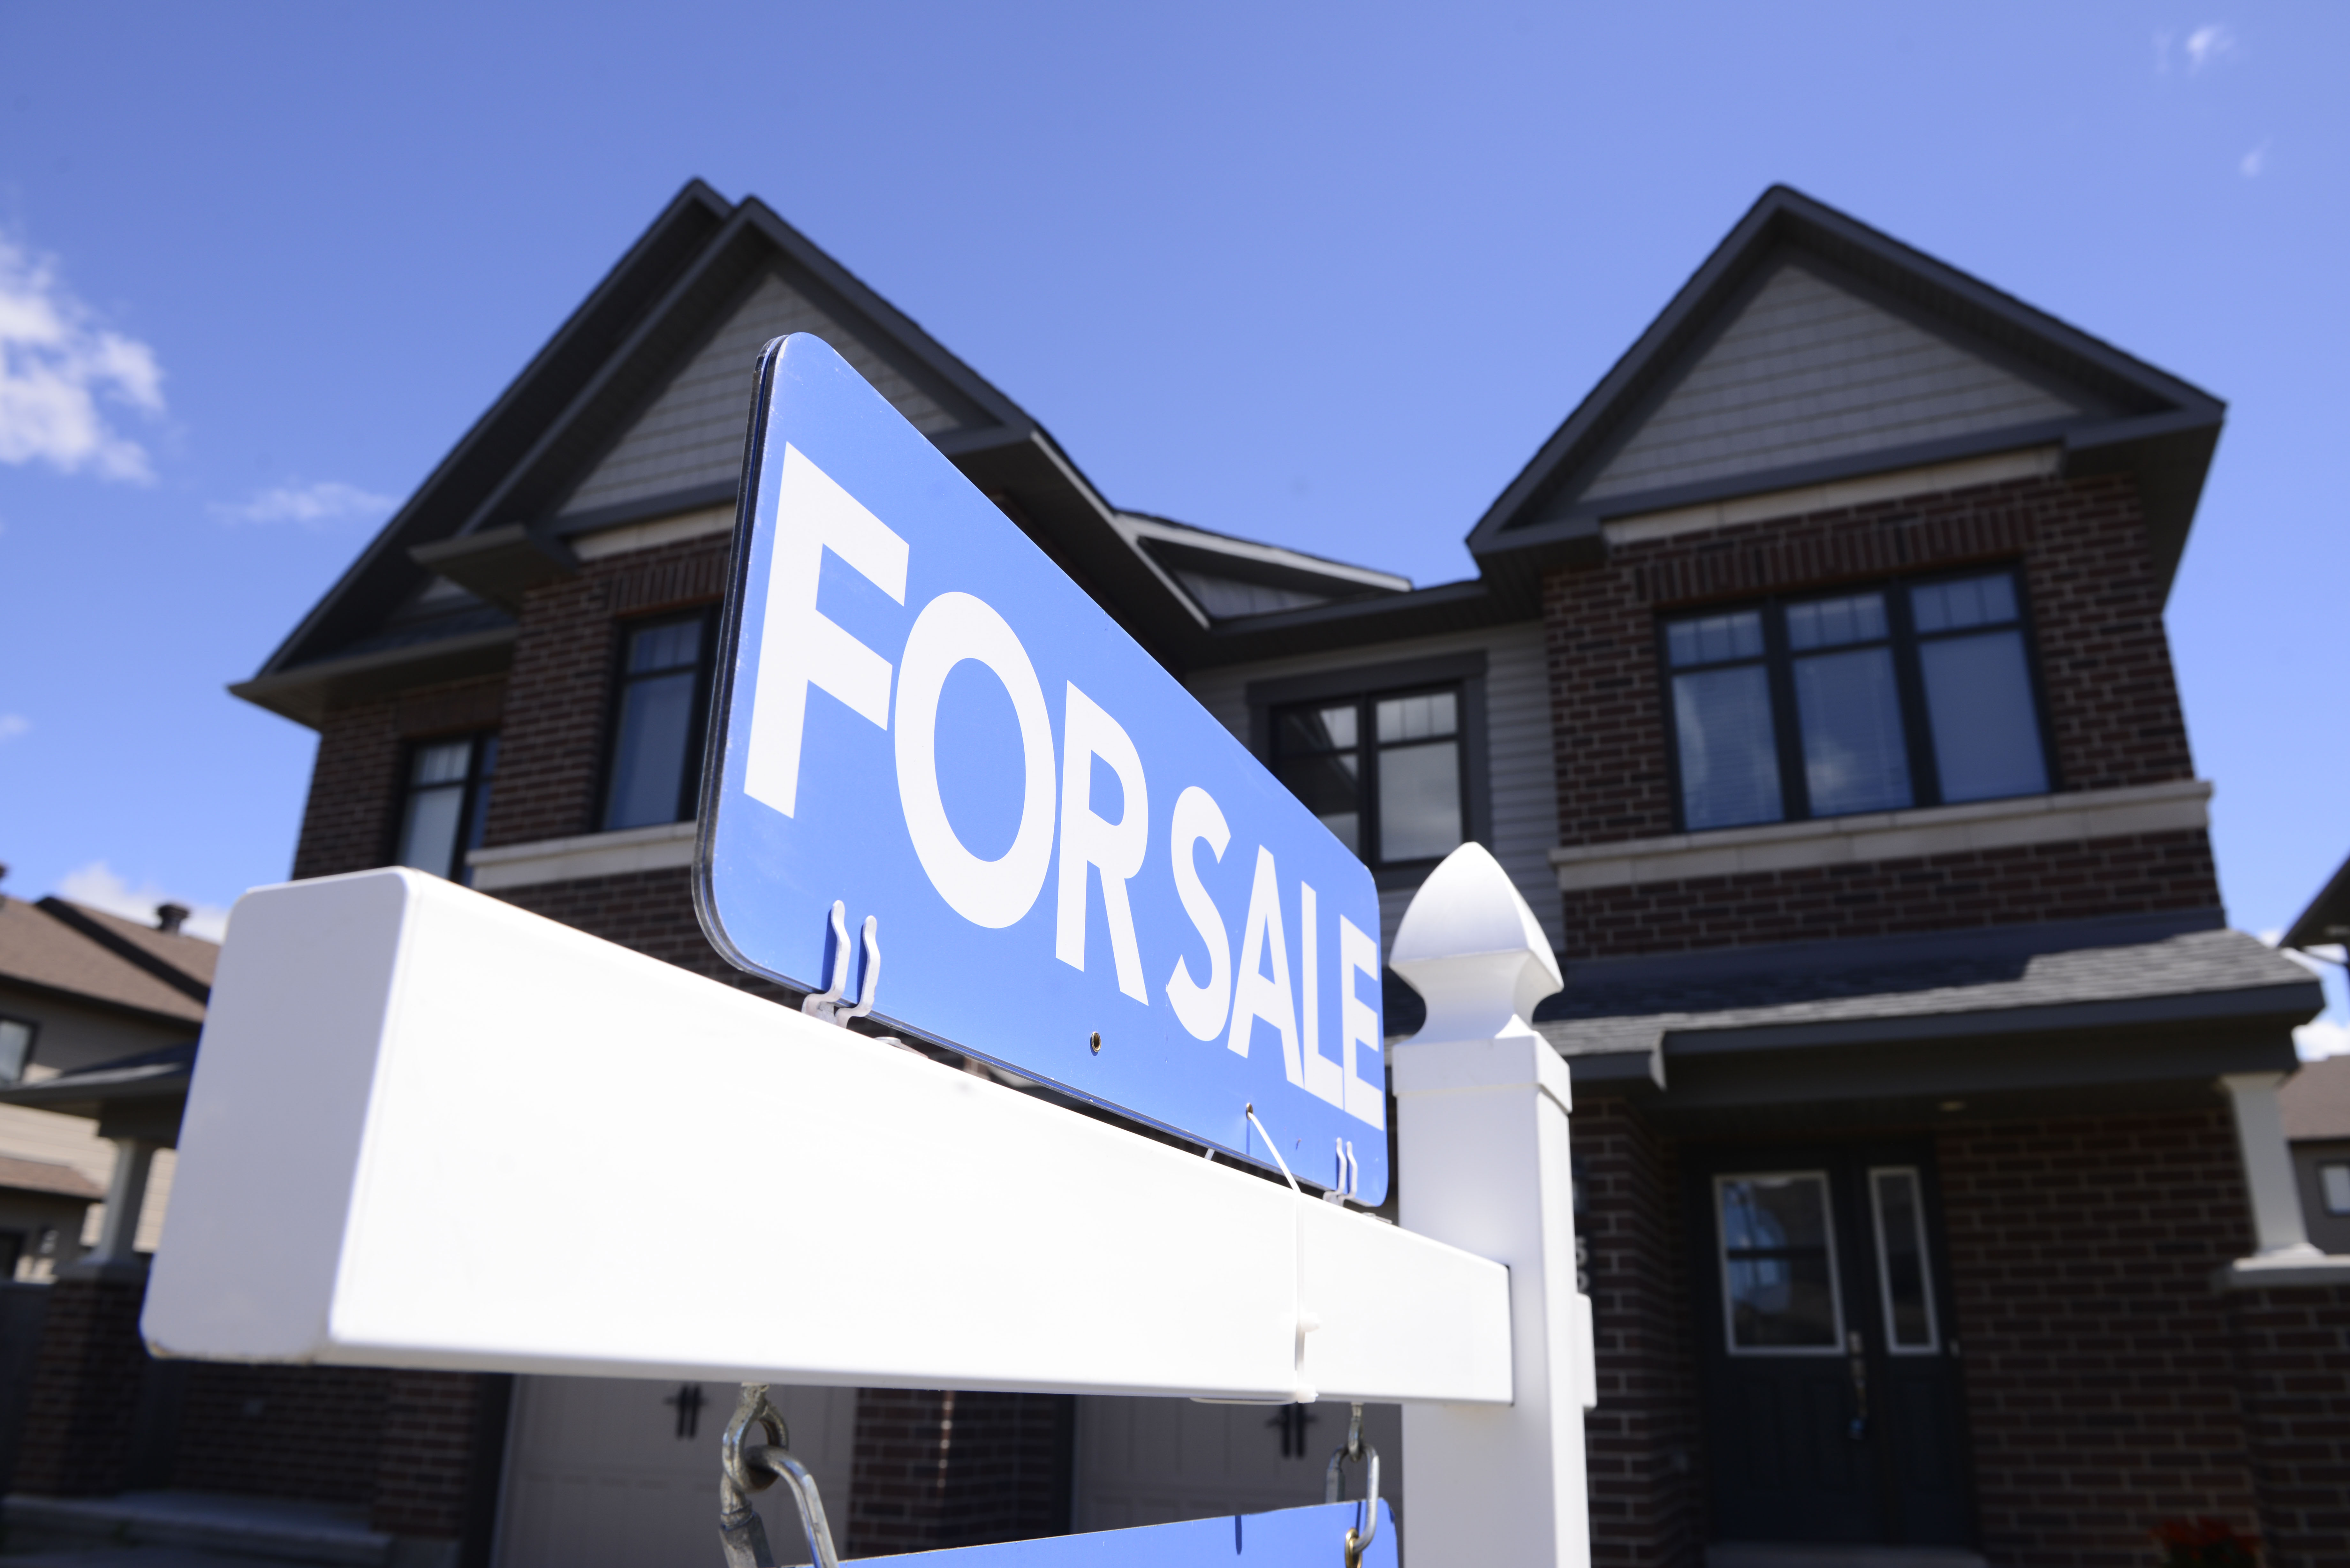 When will home prices bottom out in Canada? RBC says spring